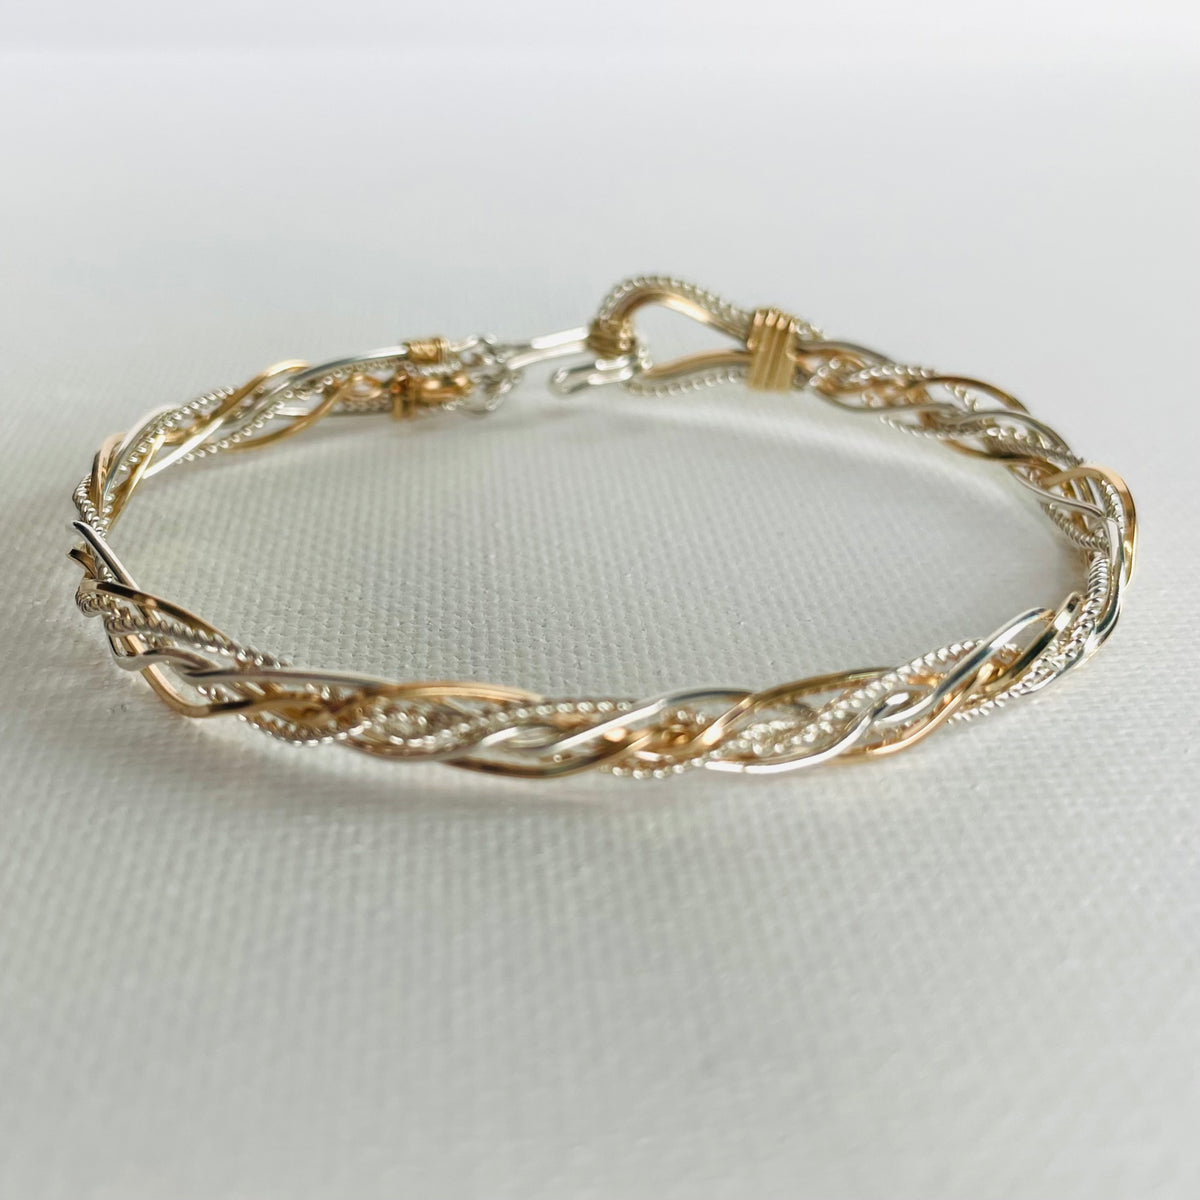 Twisted Sterling Silver and Gold Bracelet